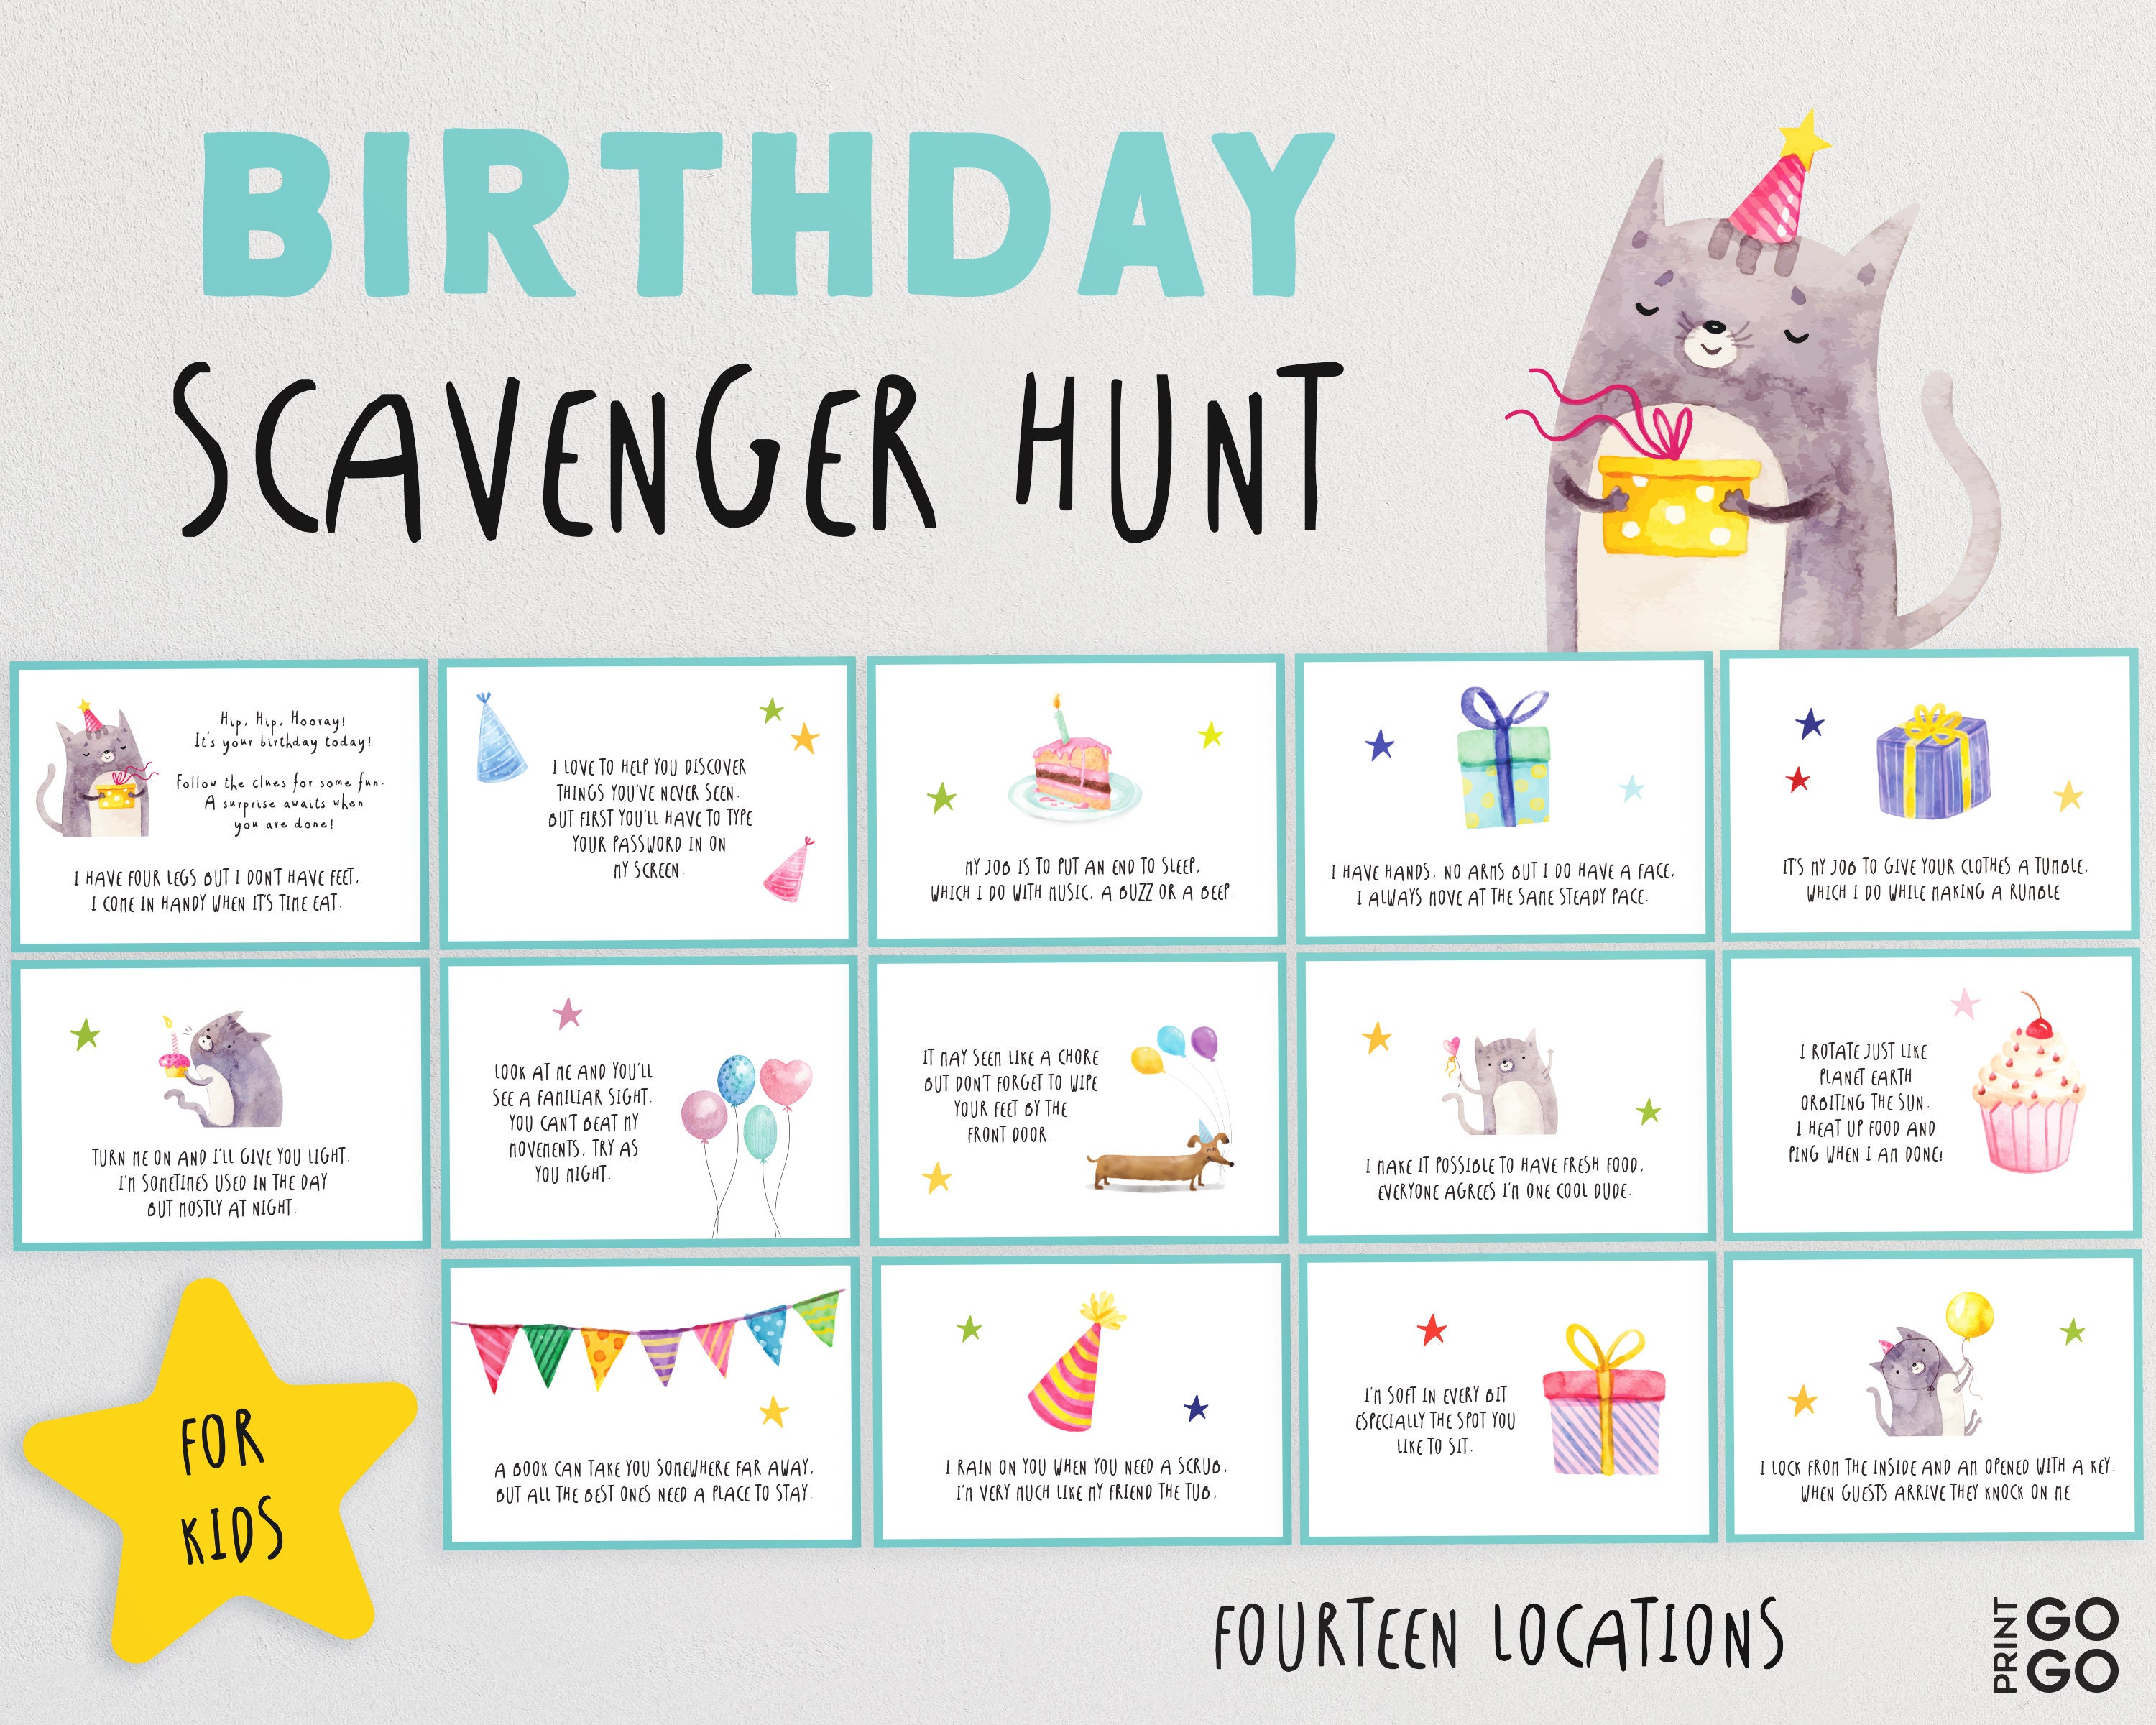 how-to-do-a-scavenger-hunt-with-clues-scavenger-ideas-2019